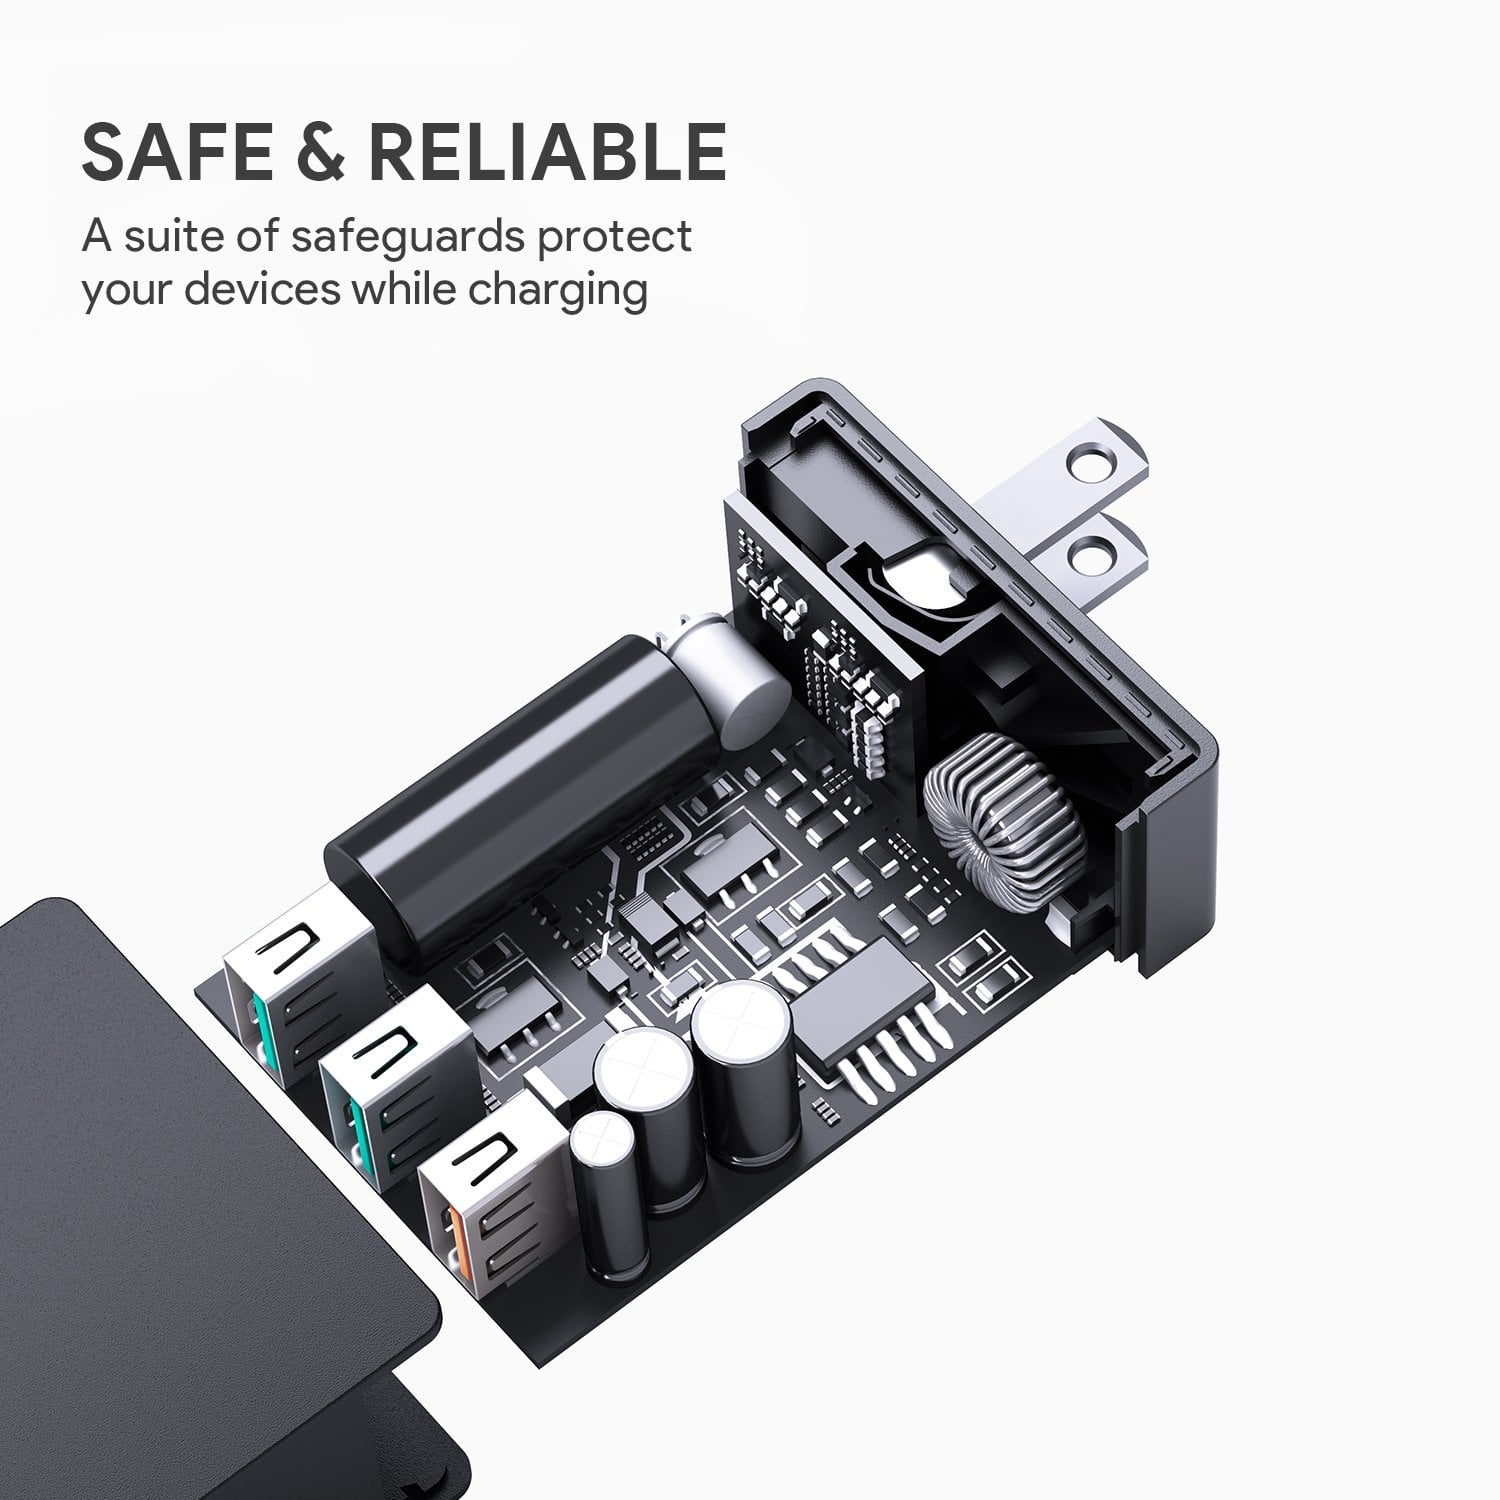 SAFE & RELIABLE A suite of safeguards protect your devices while charging